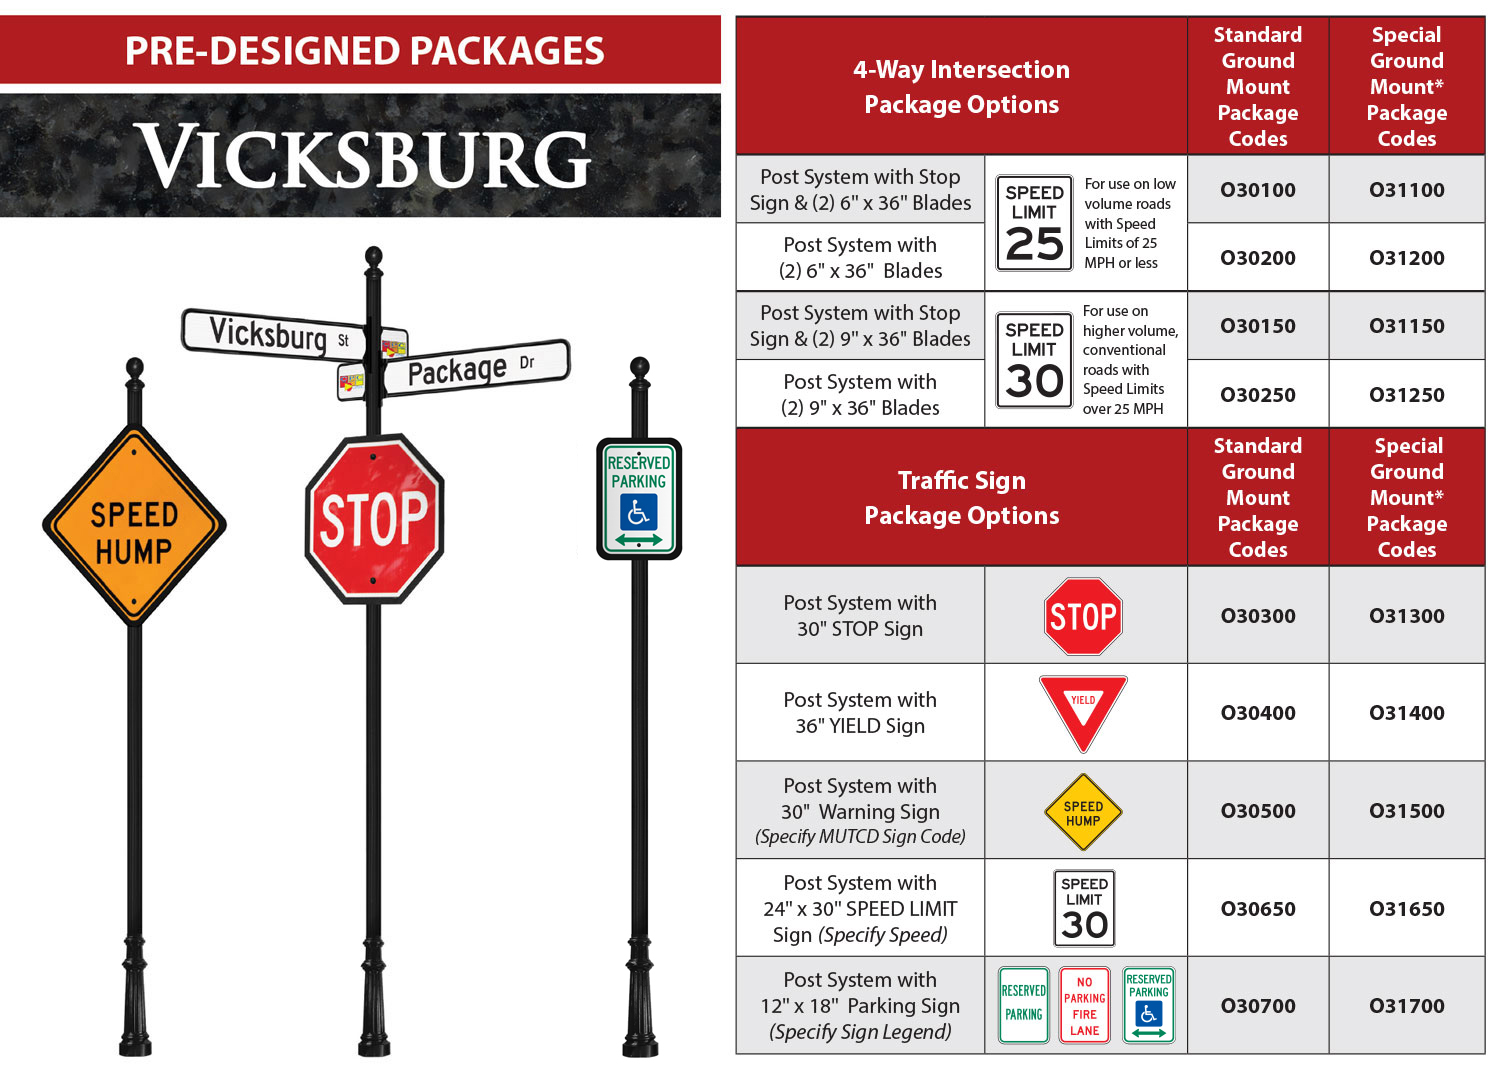 Vicksburg Packages Overview